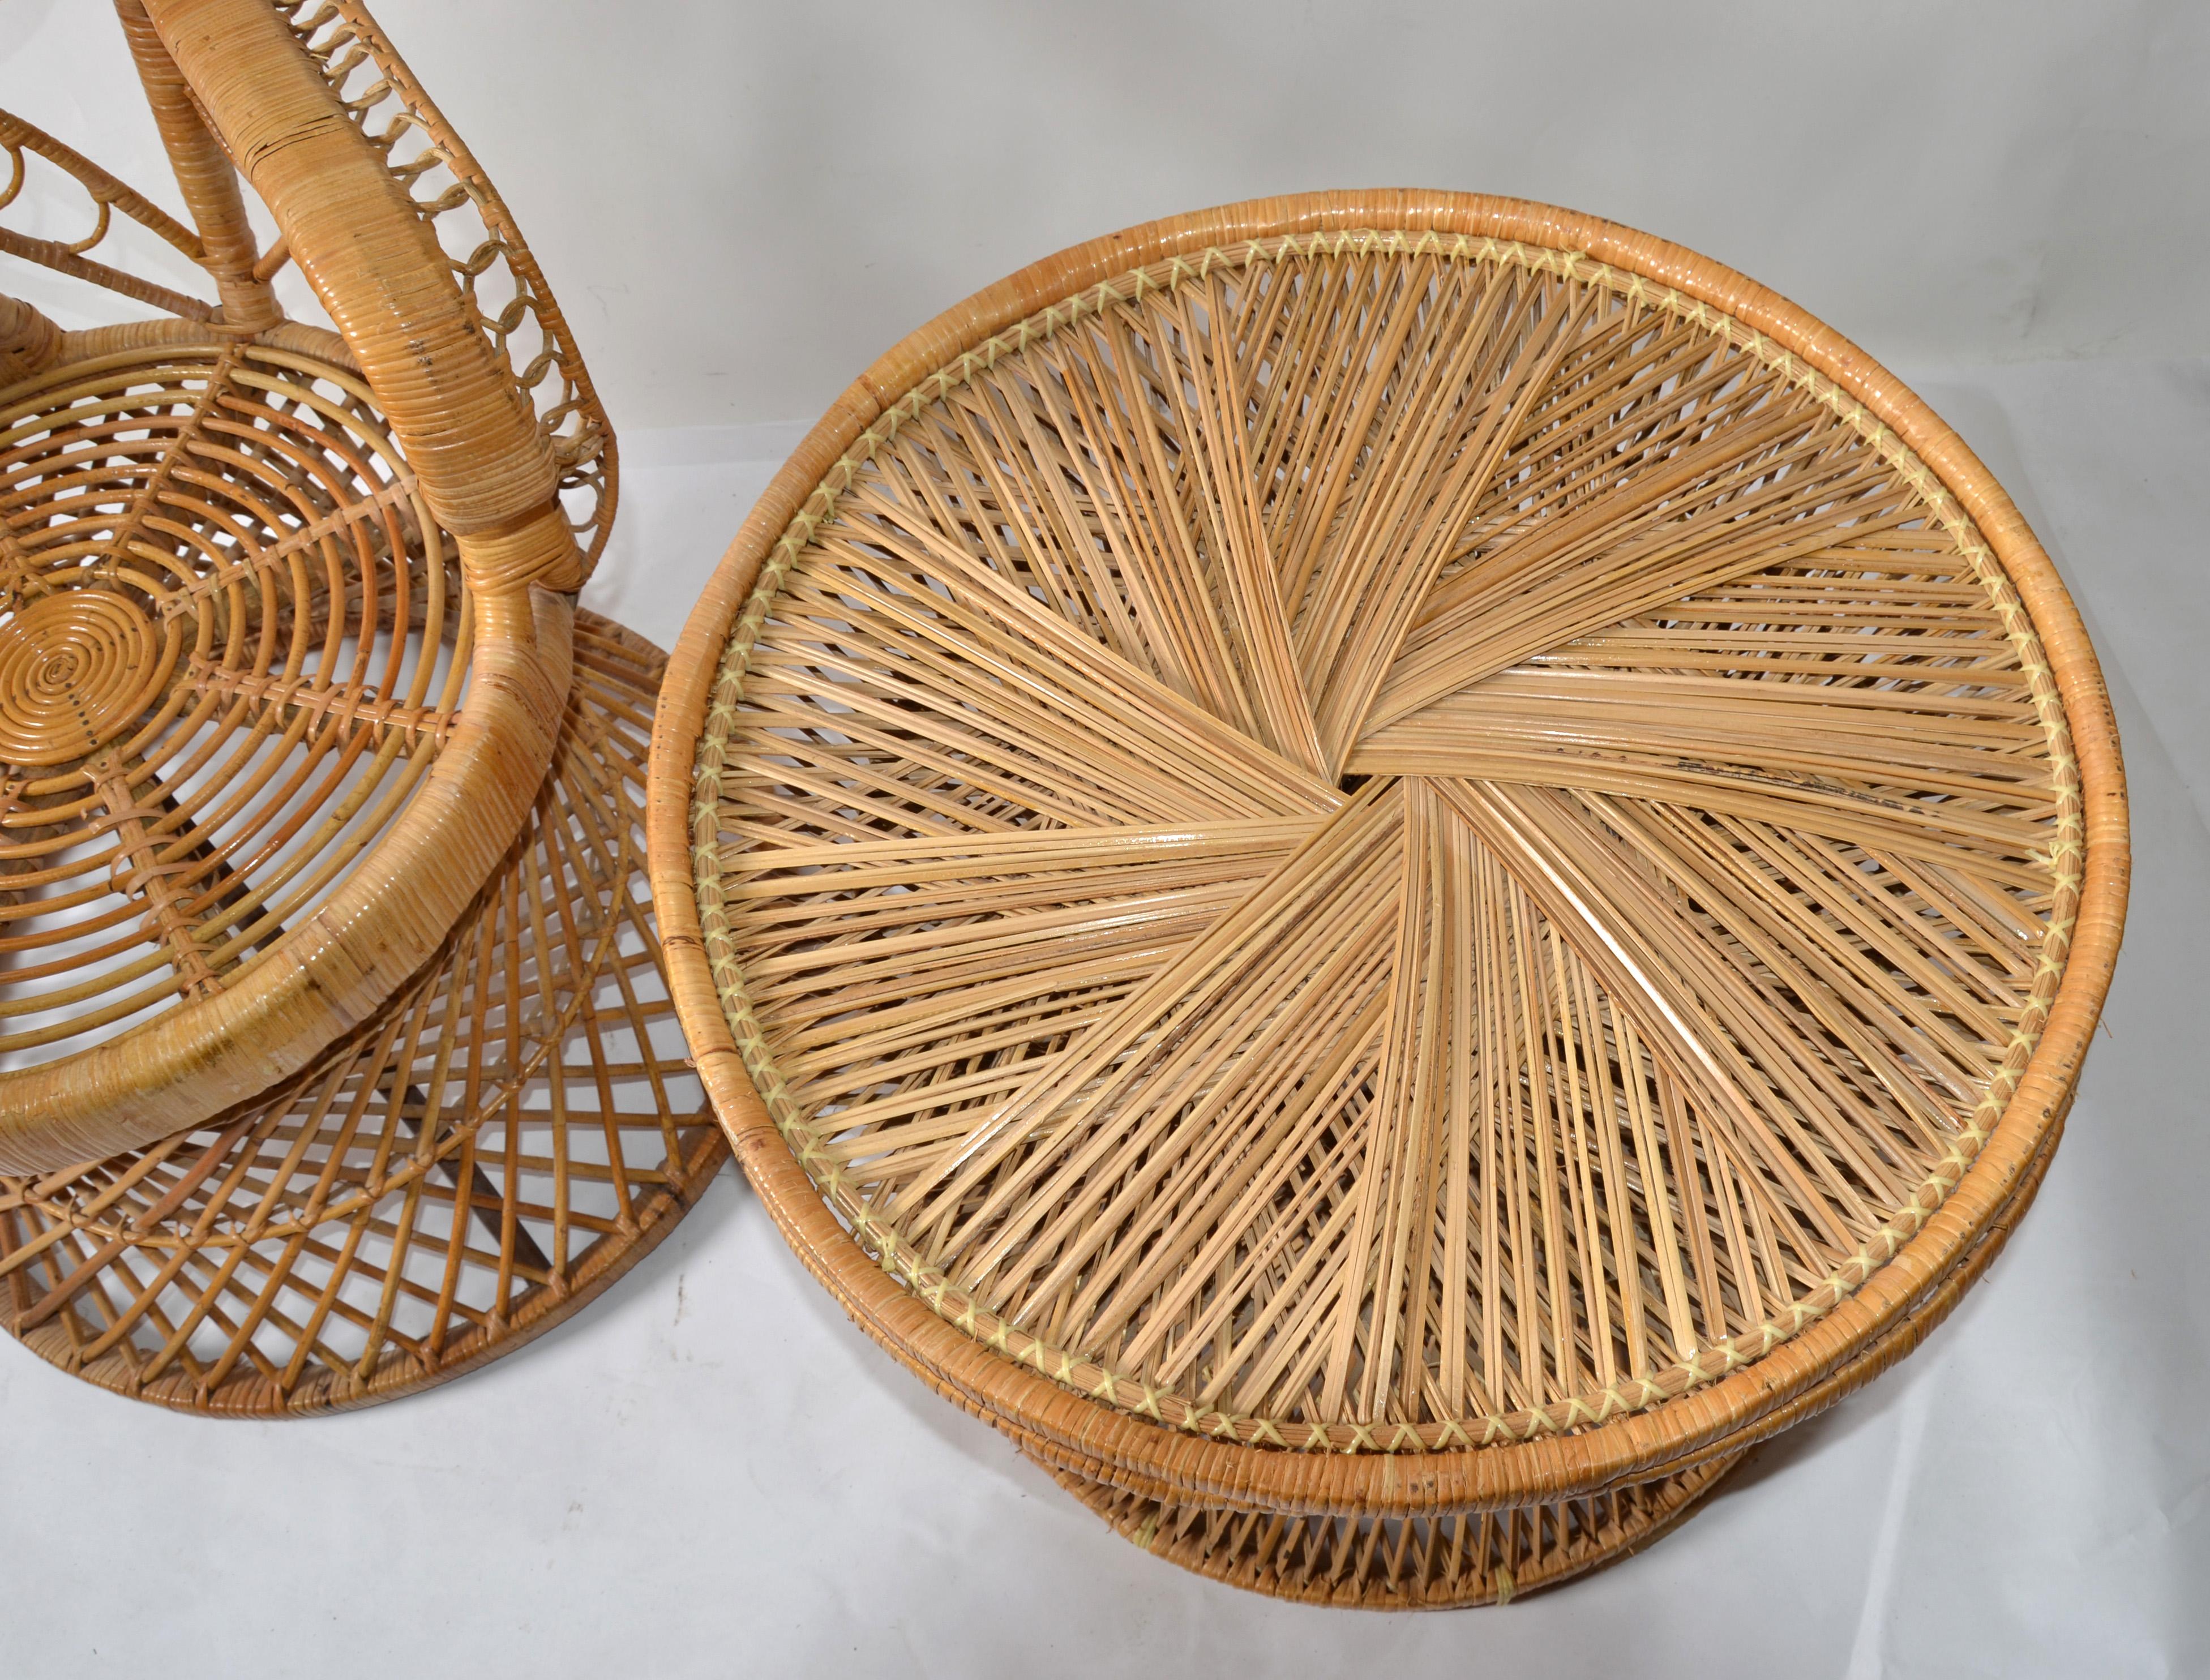 Coastal Vintage Round Rattan Accent Table Hand-Woven Wicker Caning Peacock Chair en vente 2